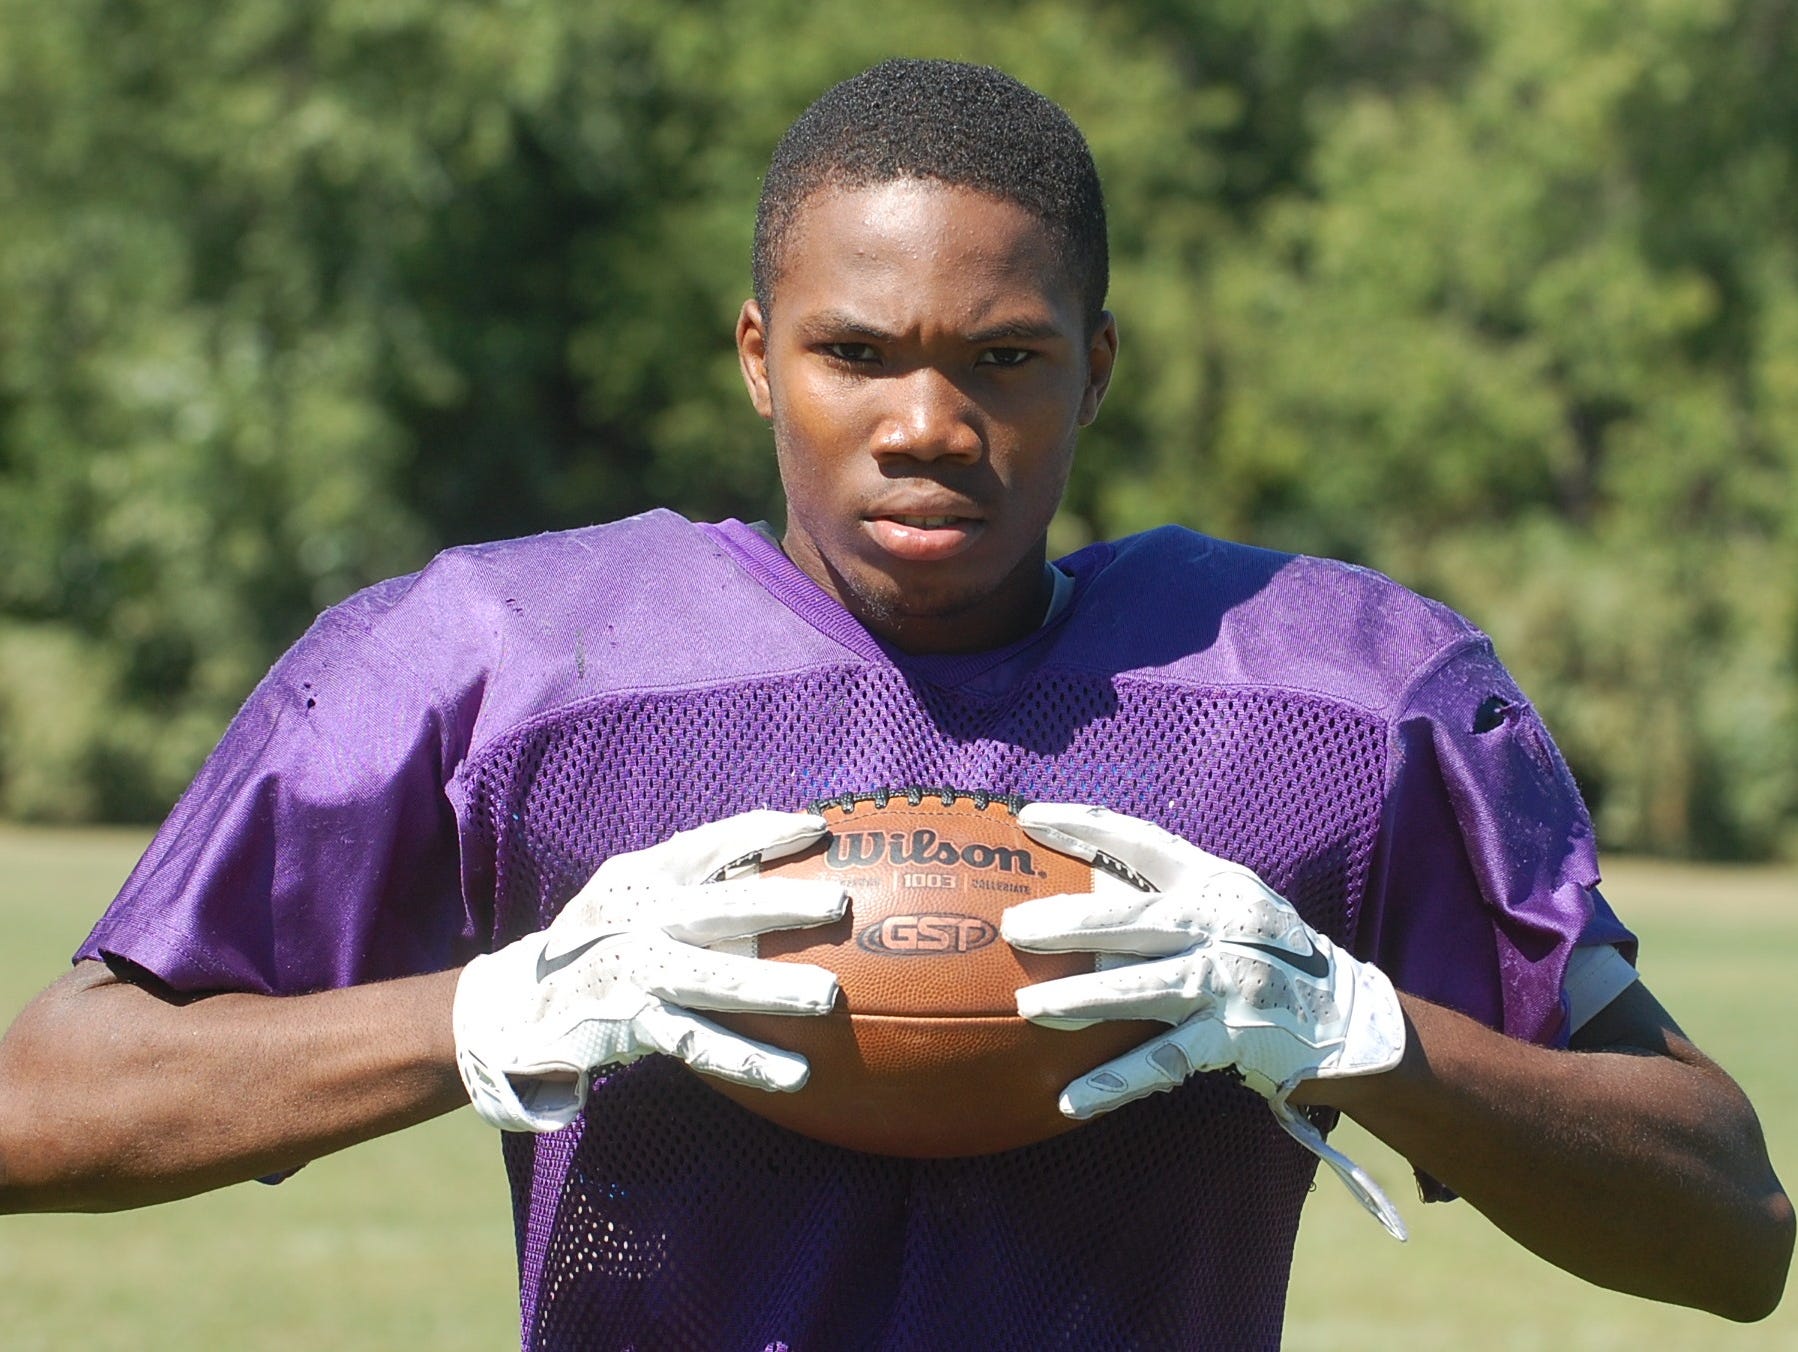 Cherry Hill West's Shameer Parks has developed into a good football person and a better person according to his coach.